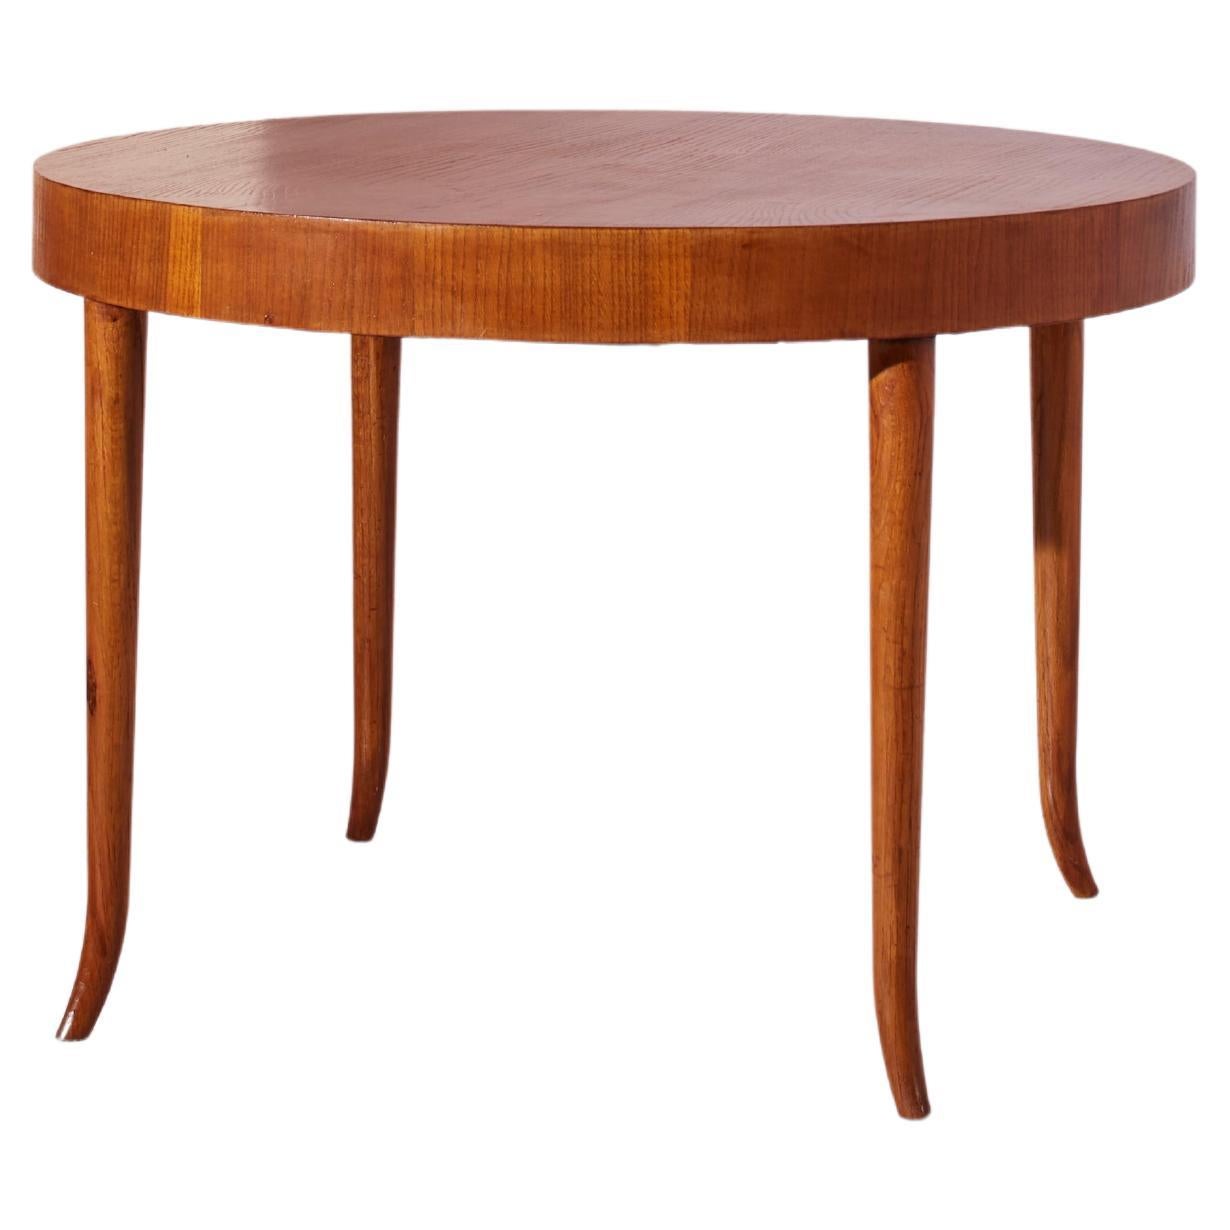 Guglielmo Ulrich oak round dining table, Italy, 1940s For Sale